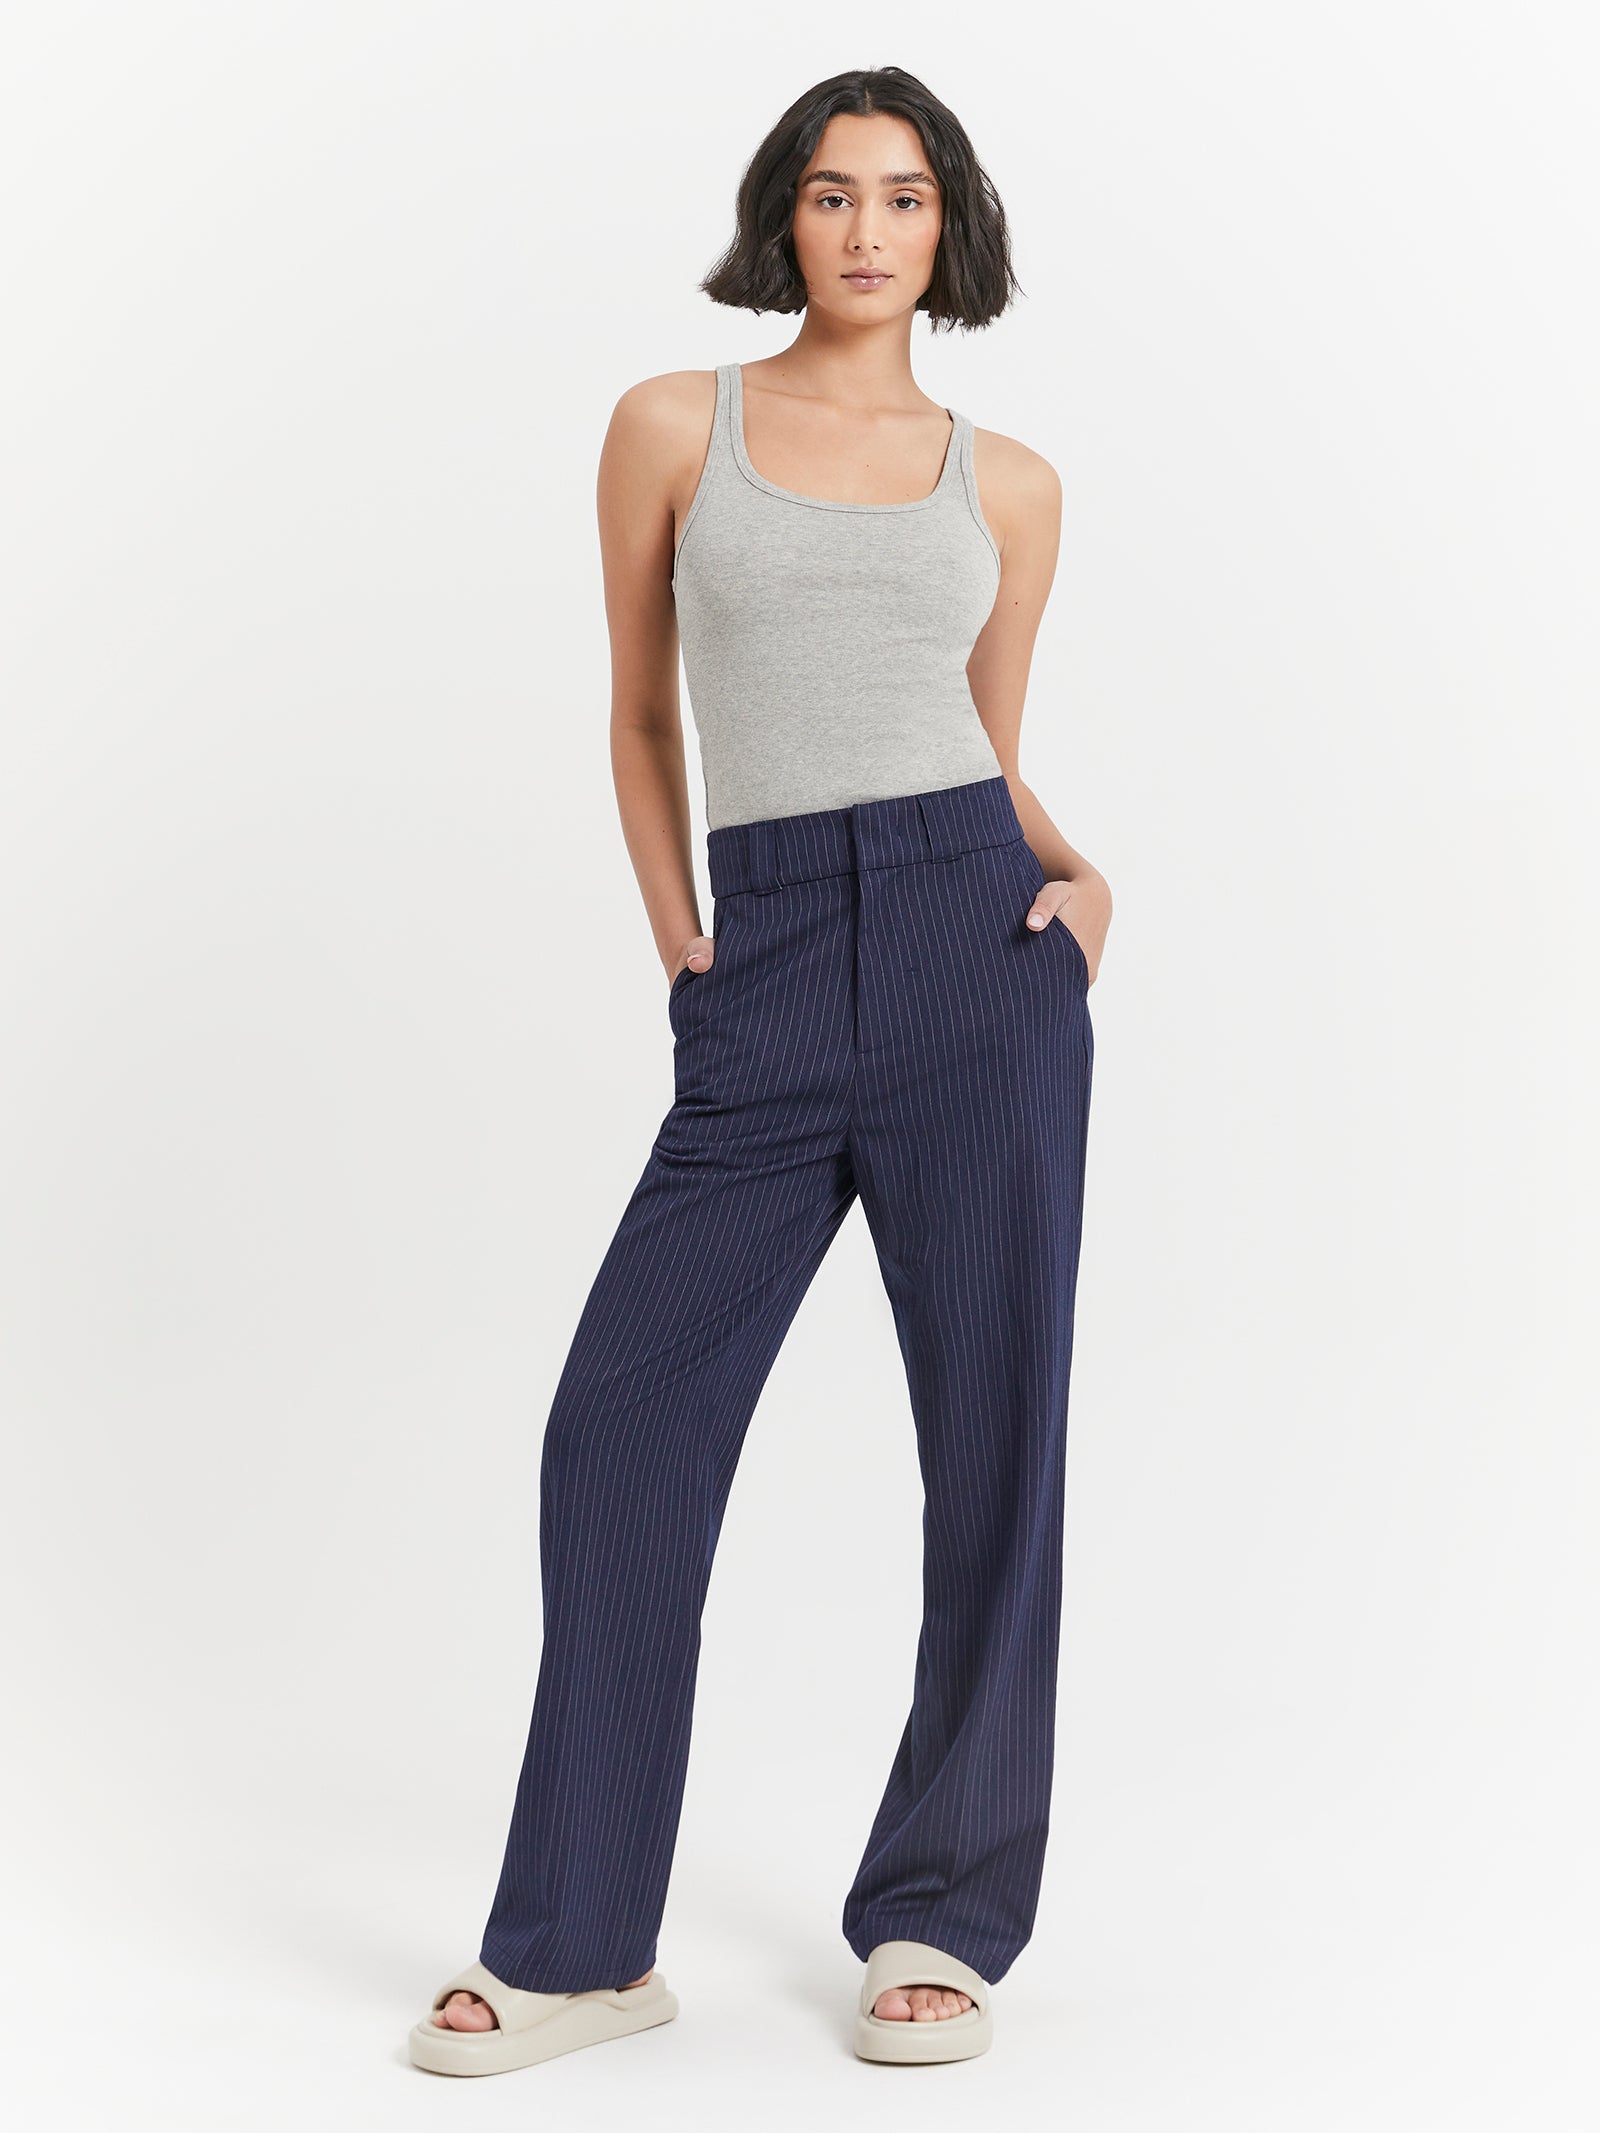 Cora Wide Leg Pants in Houndstooth - Glue Store